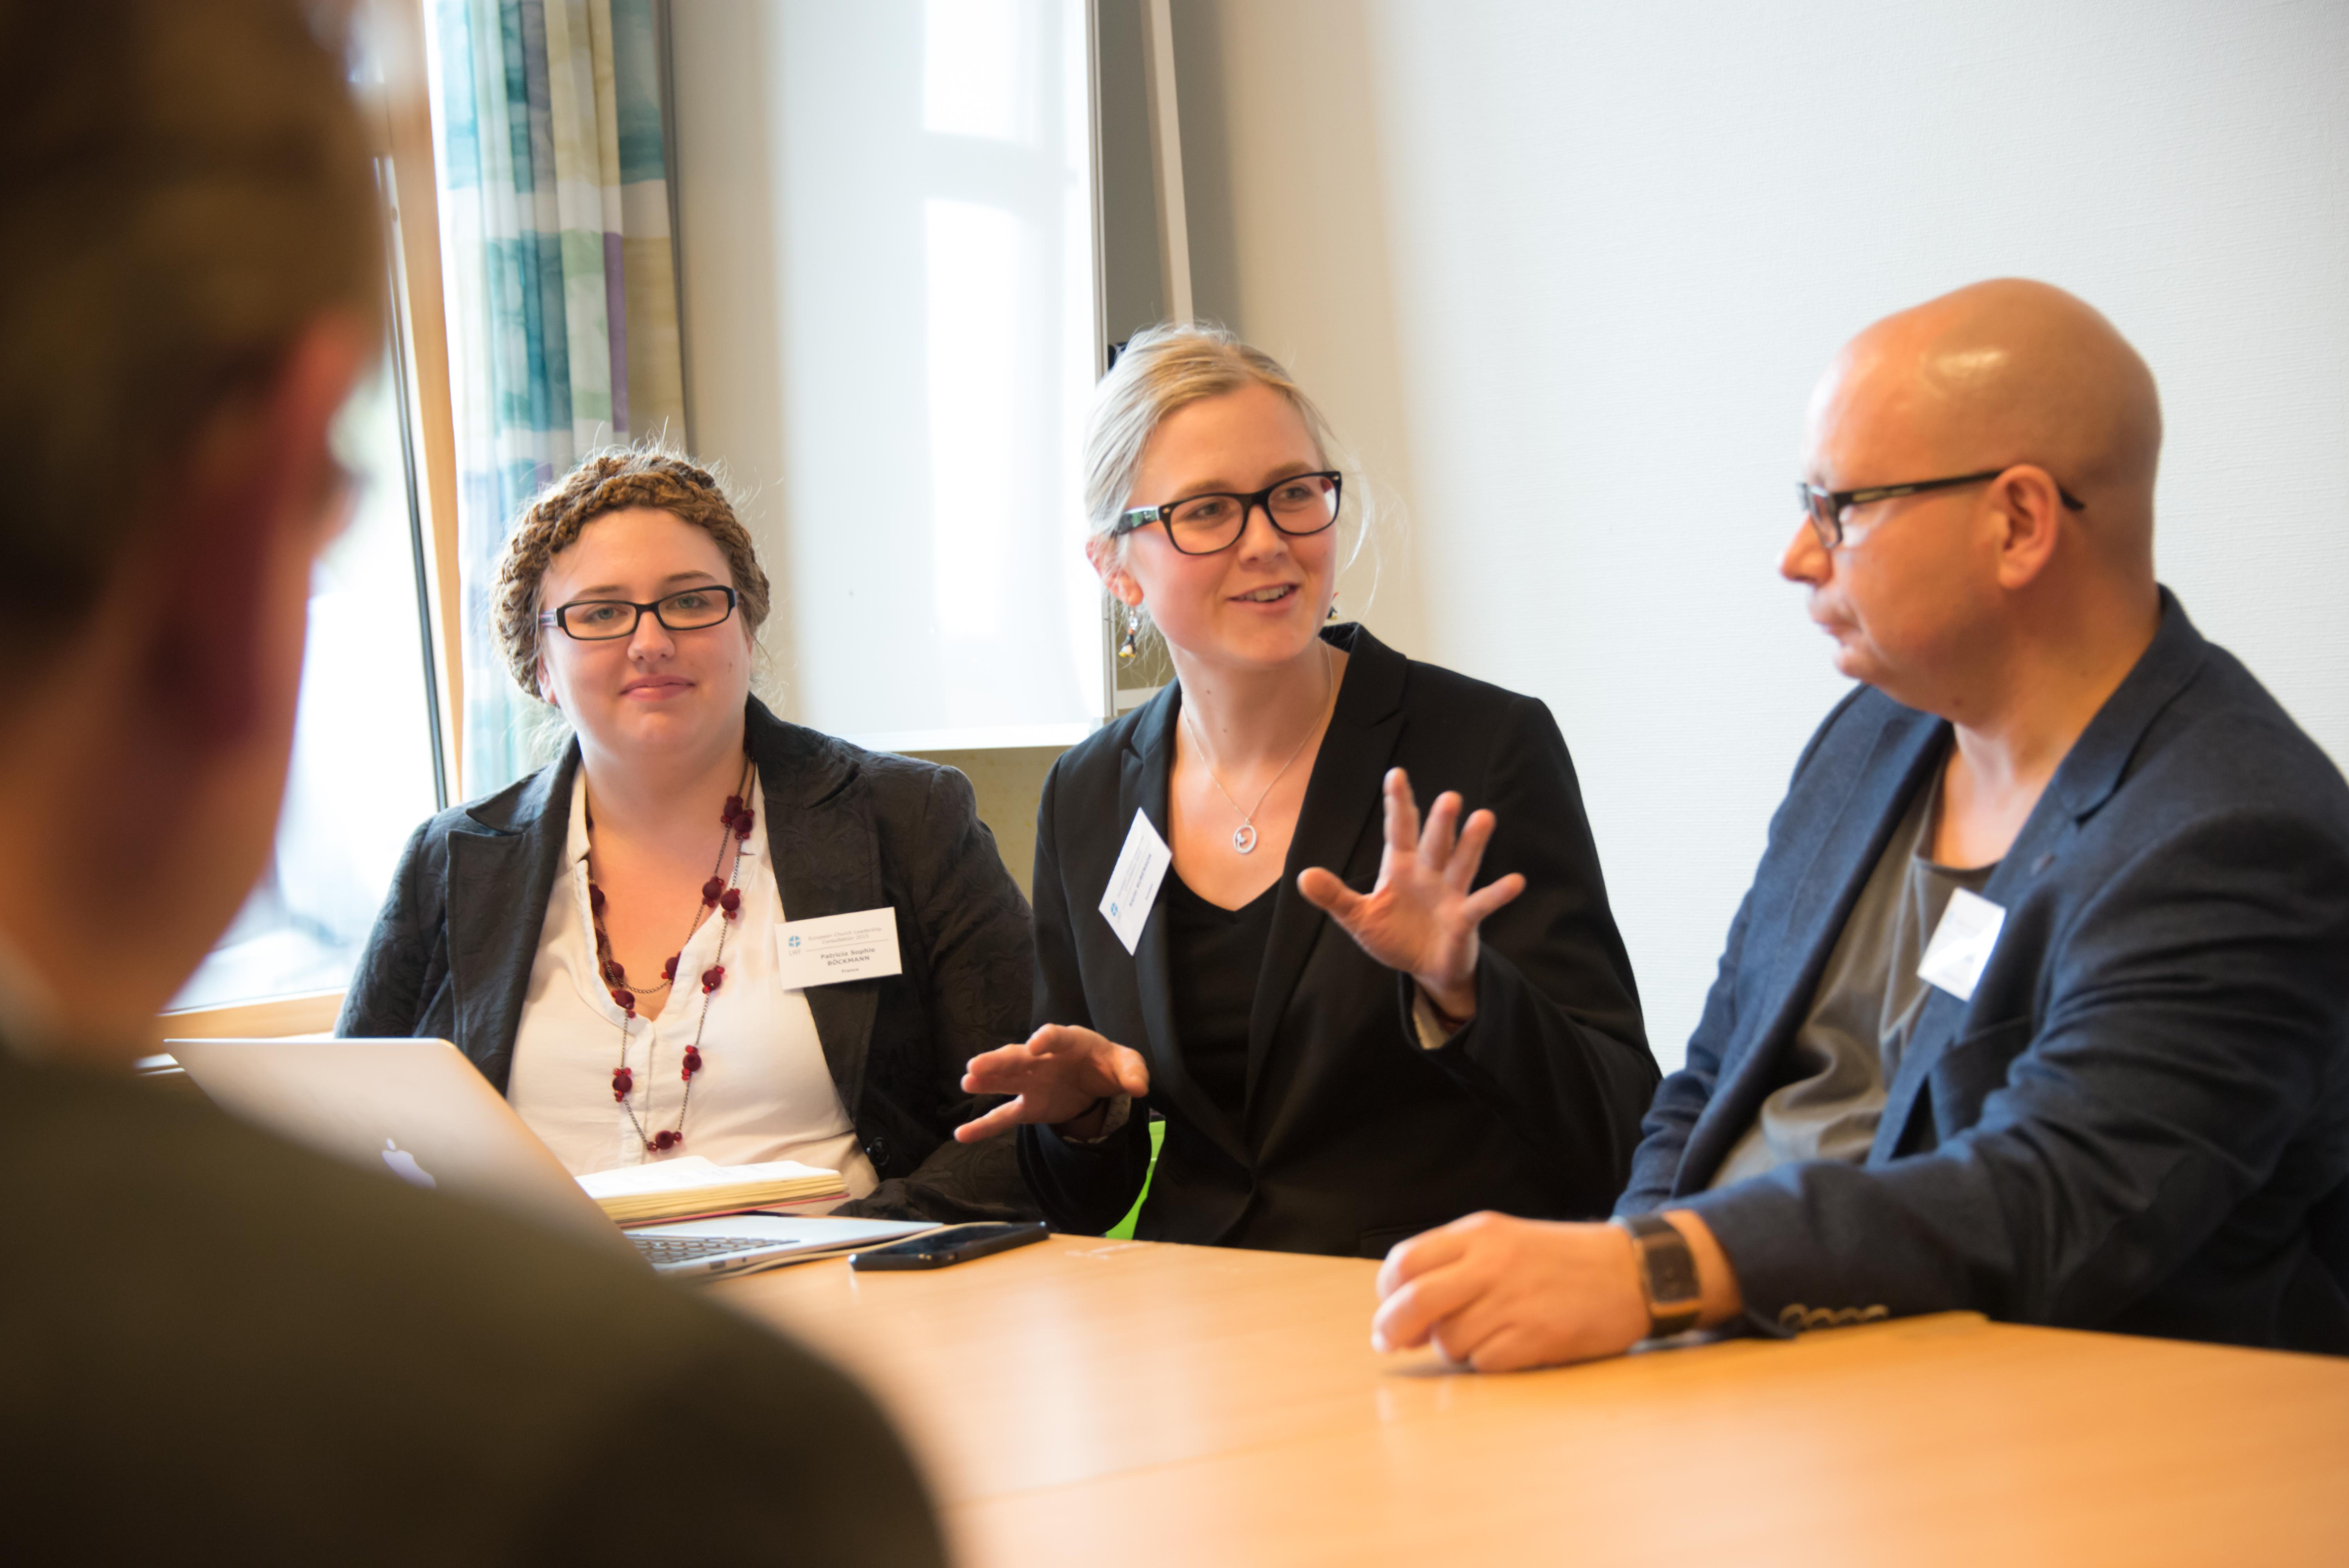 Patricia Sophie BÃ¶ckmann, from the Union of Protestant Churches of Alsace and Lorraine and Karin Rubenson, from the Church of Sweden, lead discussion on inter-generational dialogue on climate justice at a LWF meeting in Norway, May 2015. The upcoming mission meeting will encourage holistic mission among churches.